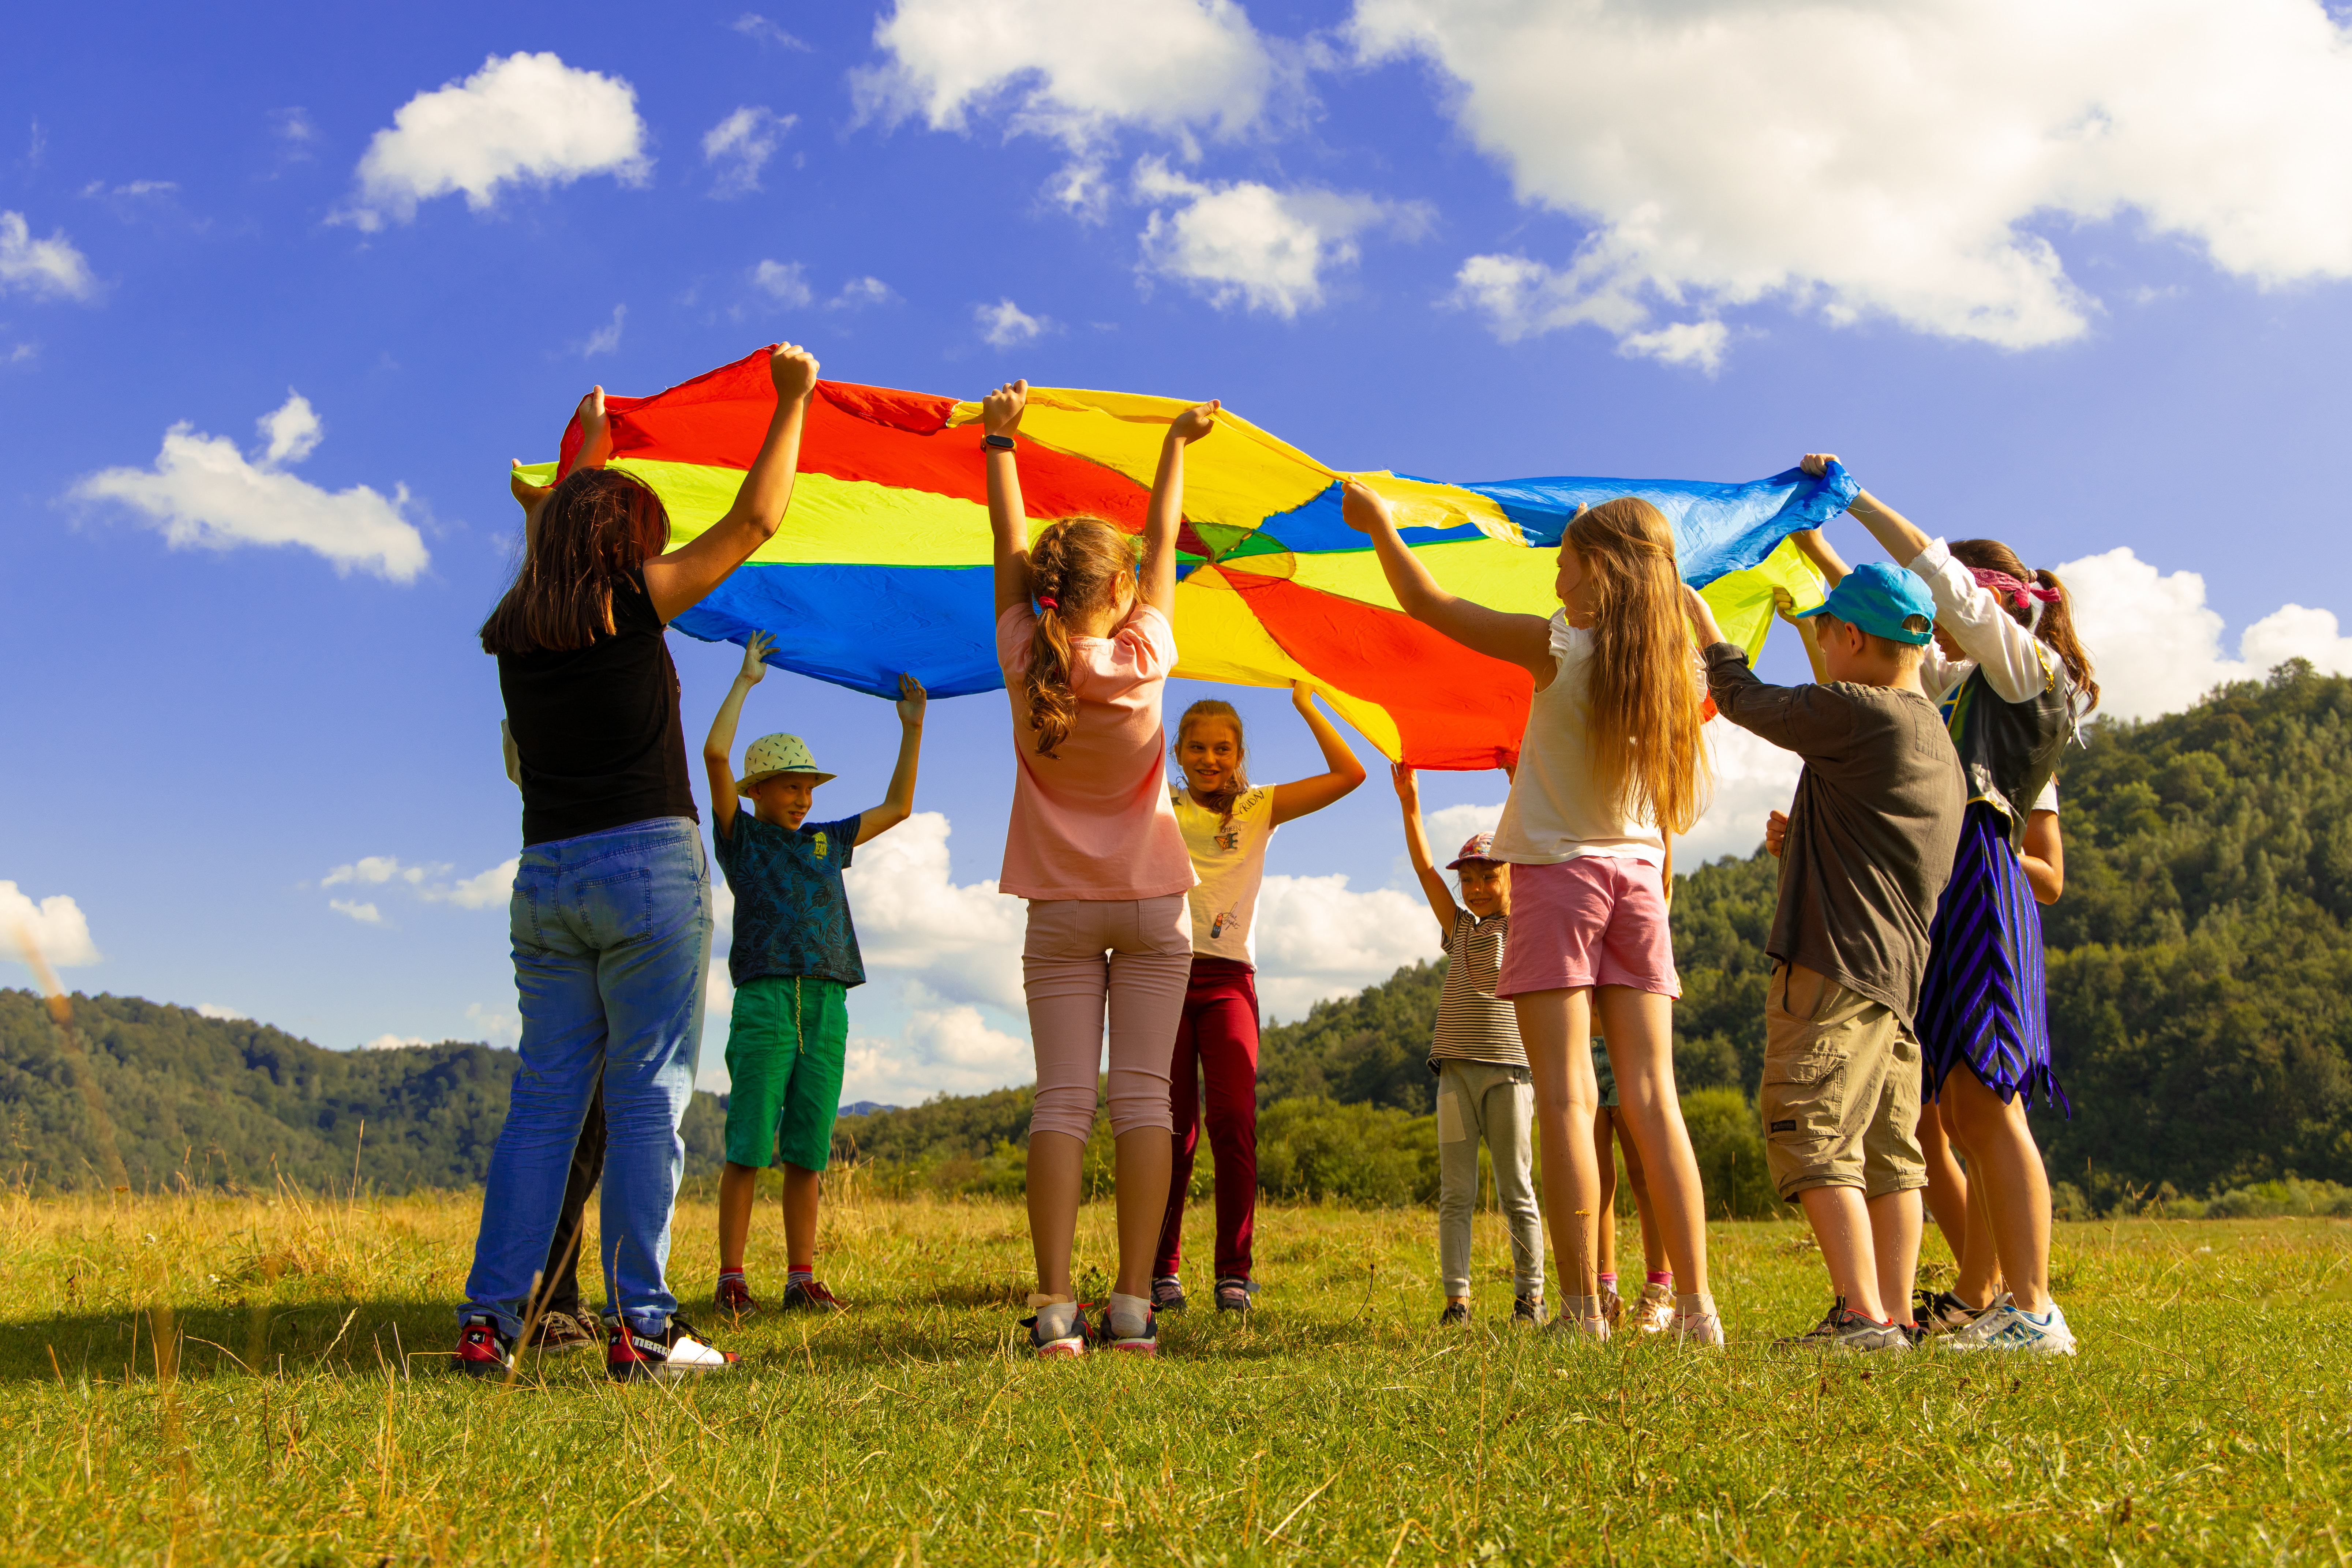 A group of children in a circle with a rainbow parachute